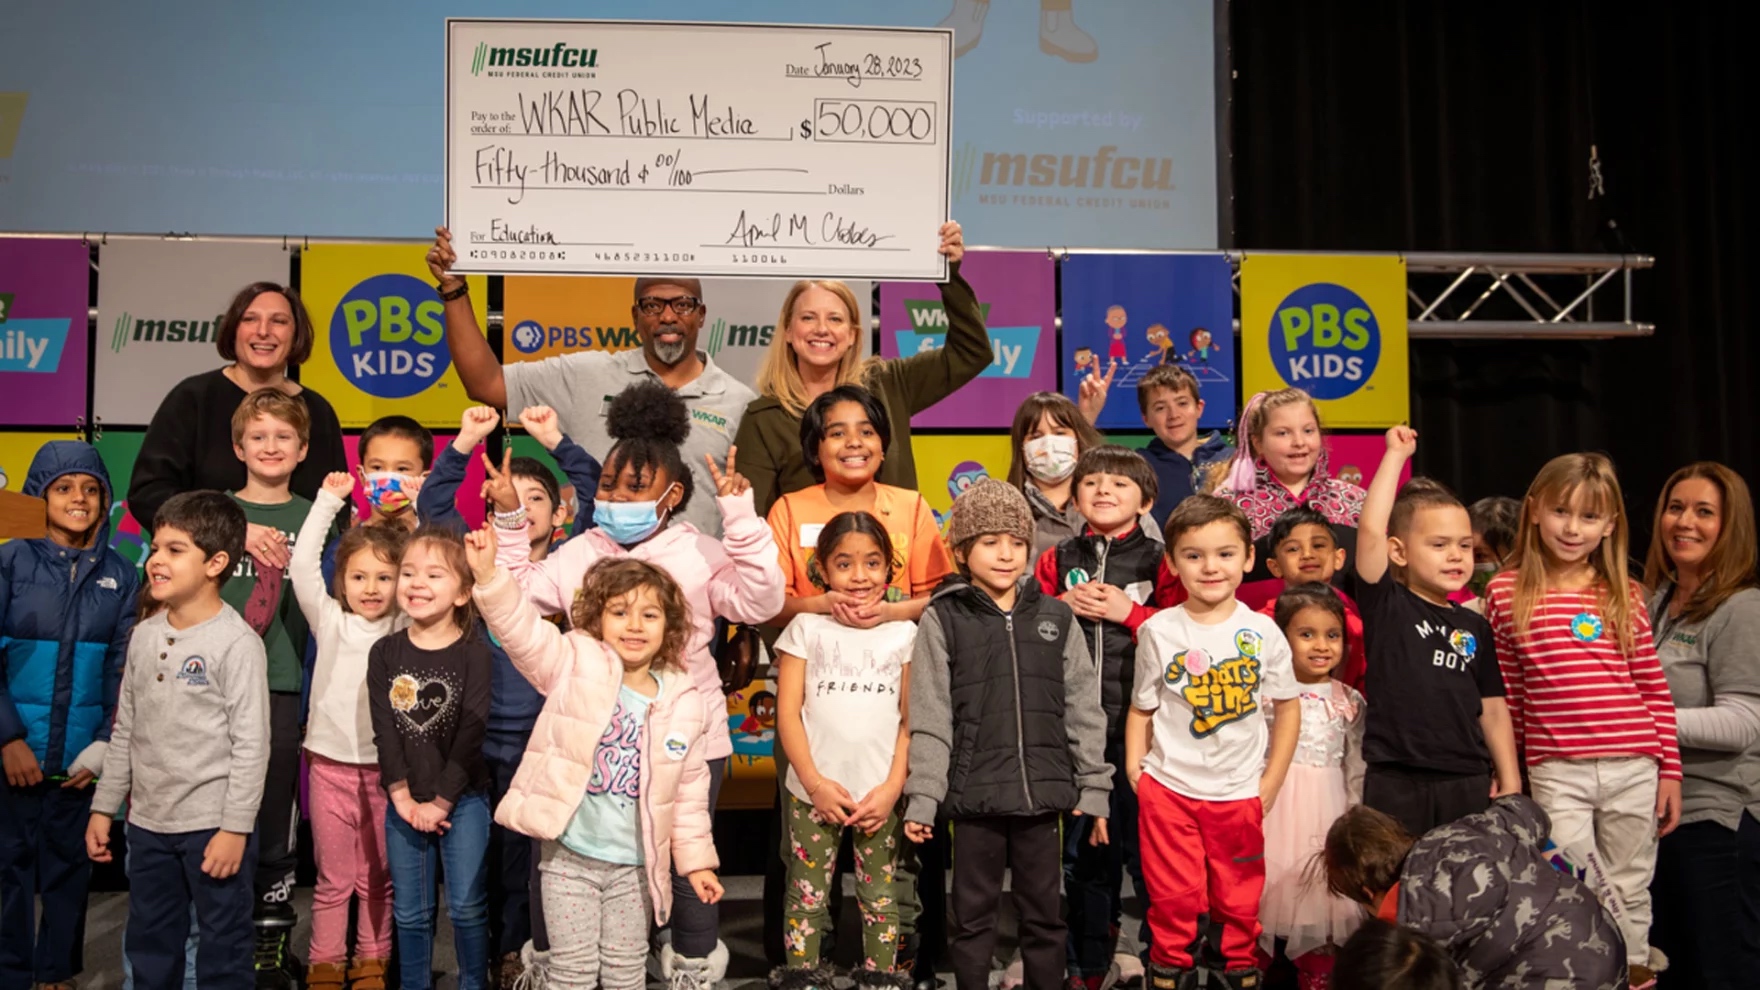 MSUFCU presents a check for $50,000 at the PBS KIDS Day with WKAR celebration on Jan. 28, 2023. April Clobes and Susi Elkins of MSUFCU (back row left and right) and Shawn Turner and Julie Sochay of WKAR (back row center and front row right) pose with just a few of the hundreds of children attending the event.